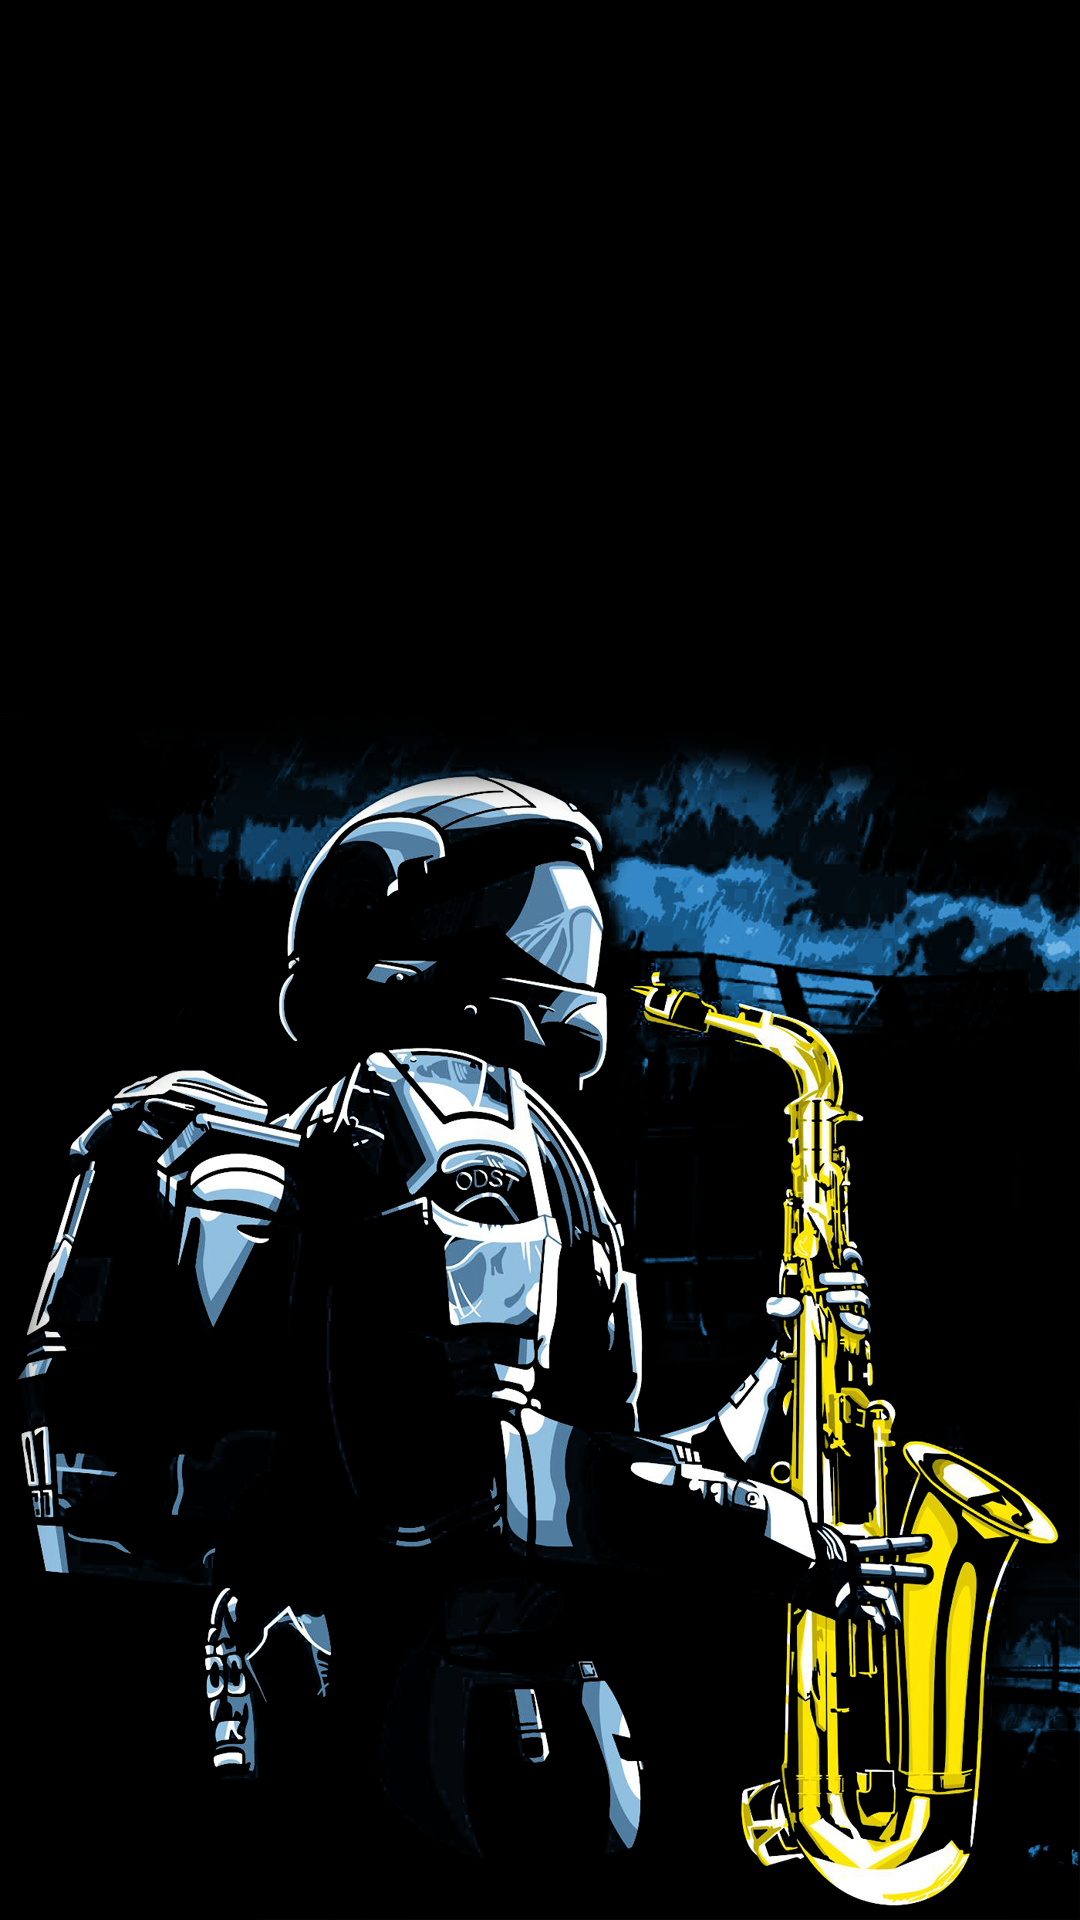 Halo 3 Odst Cover - HD Wallpaper 